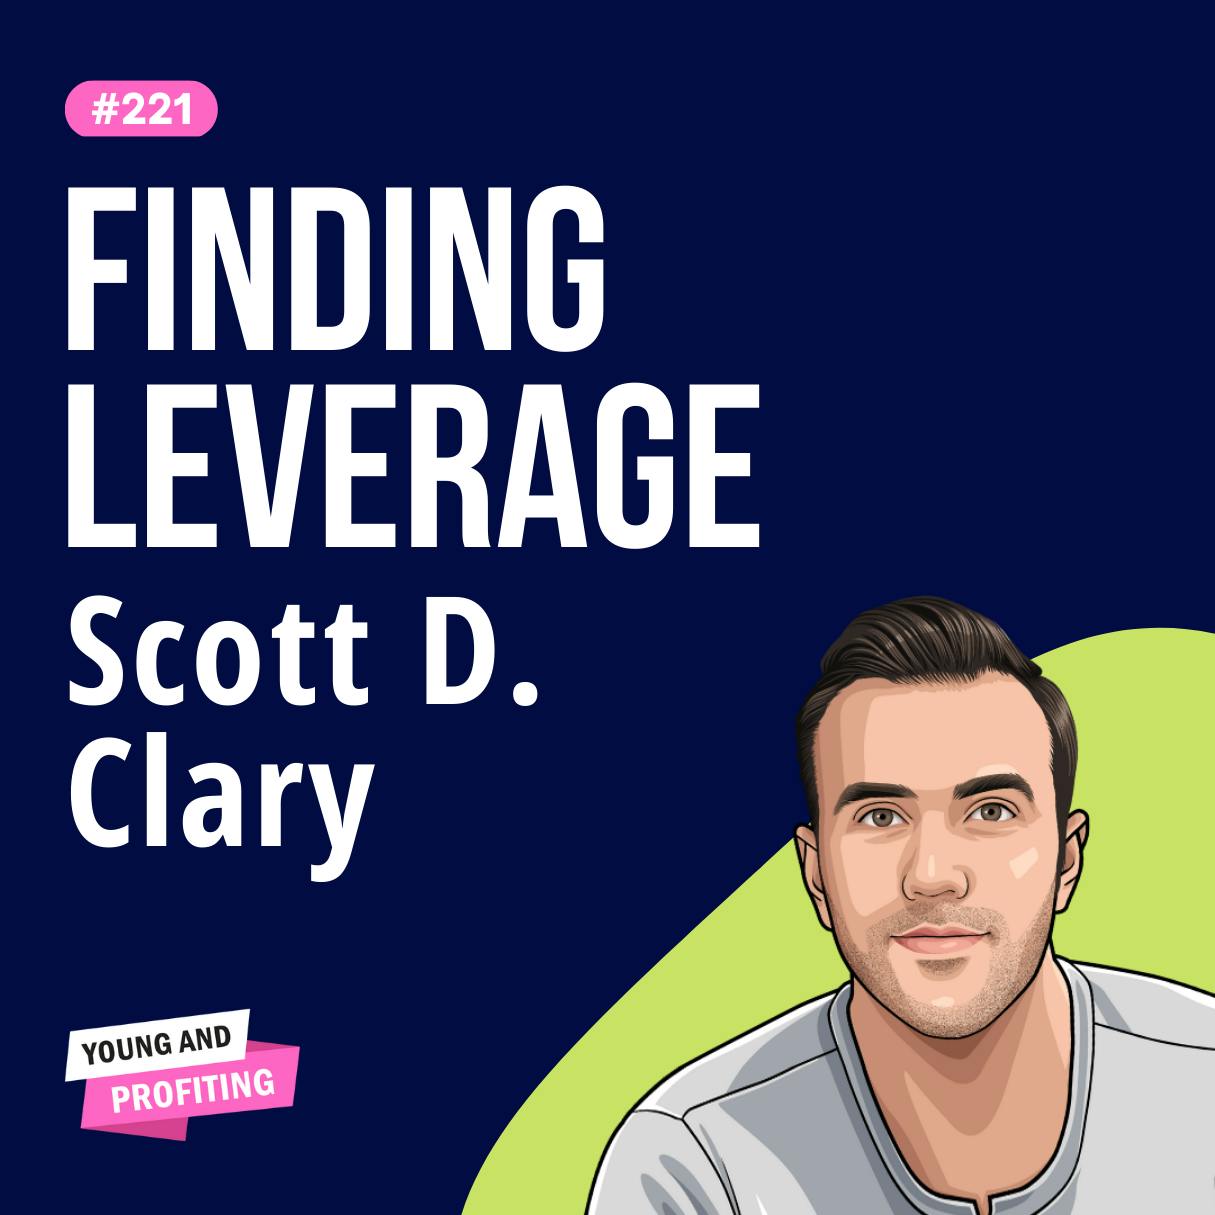 Scott D. Clary: Overcoming Imposter Syndrome, Getting Started in Entrepreneurship, and Finding Product Market Fit